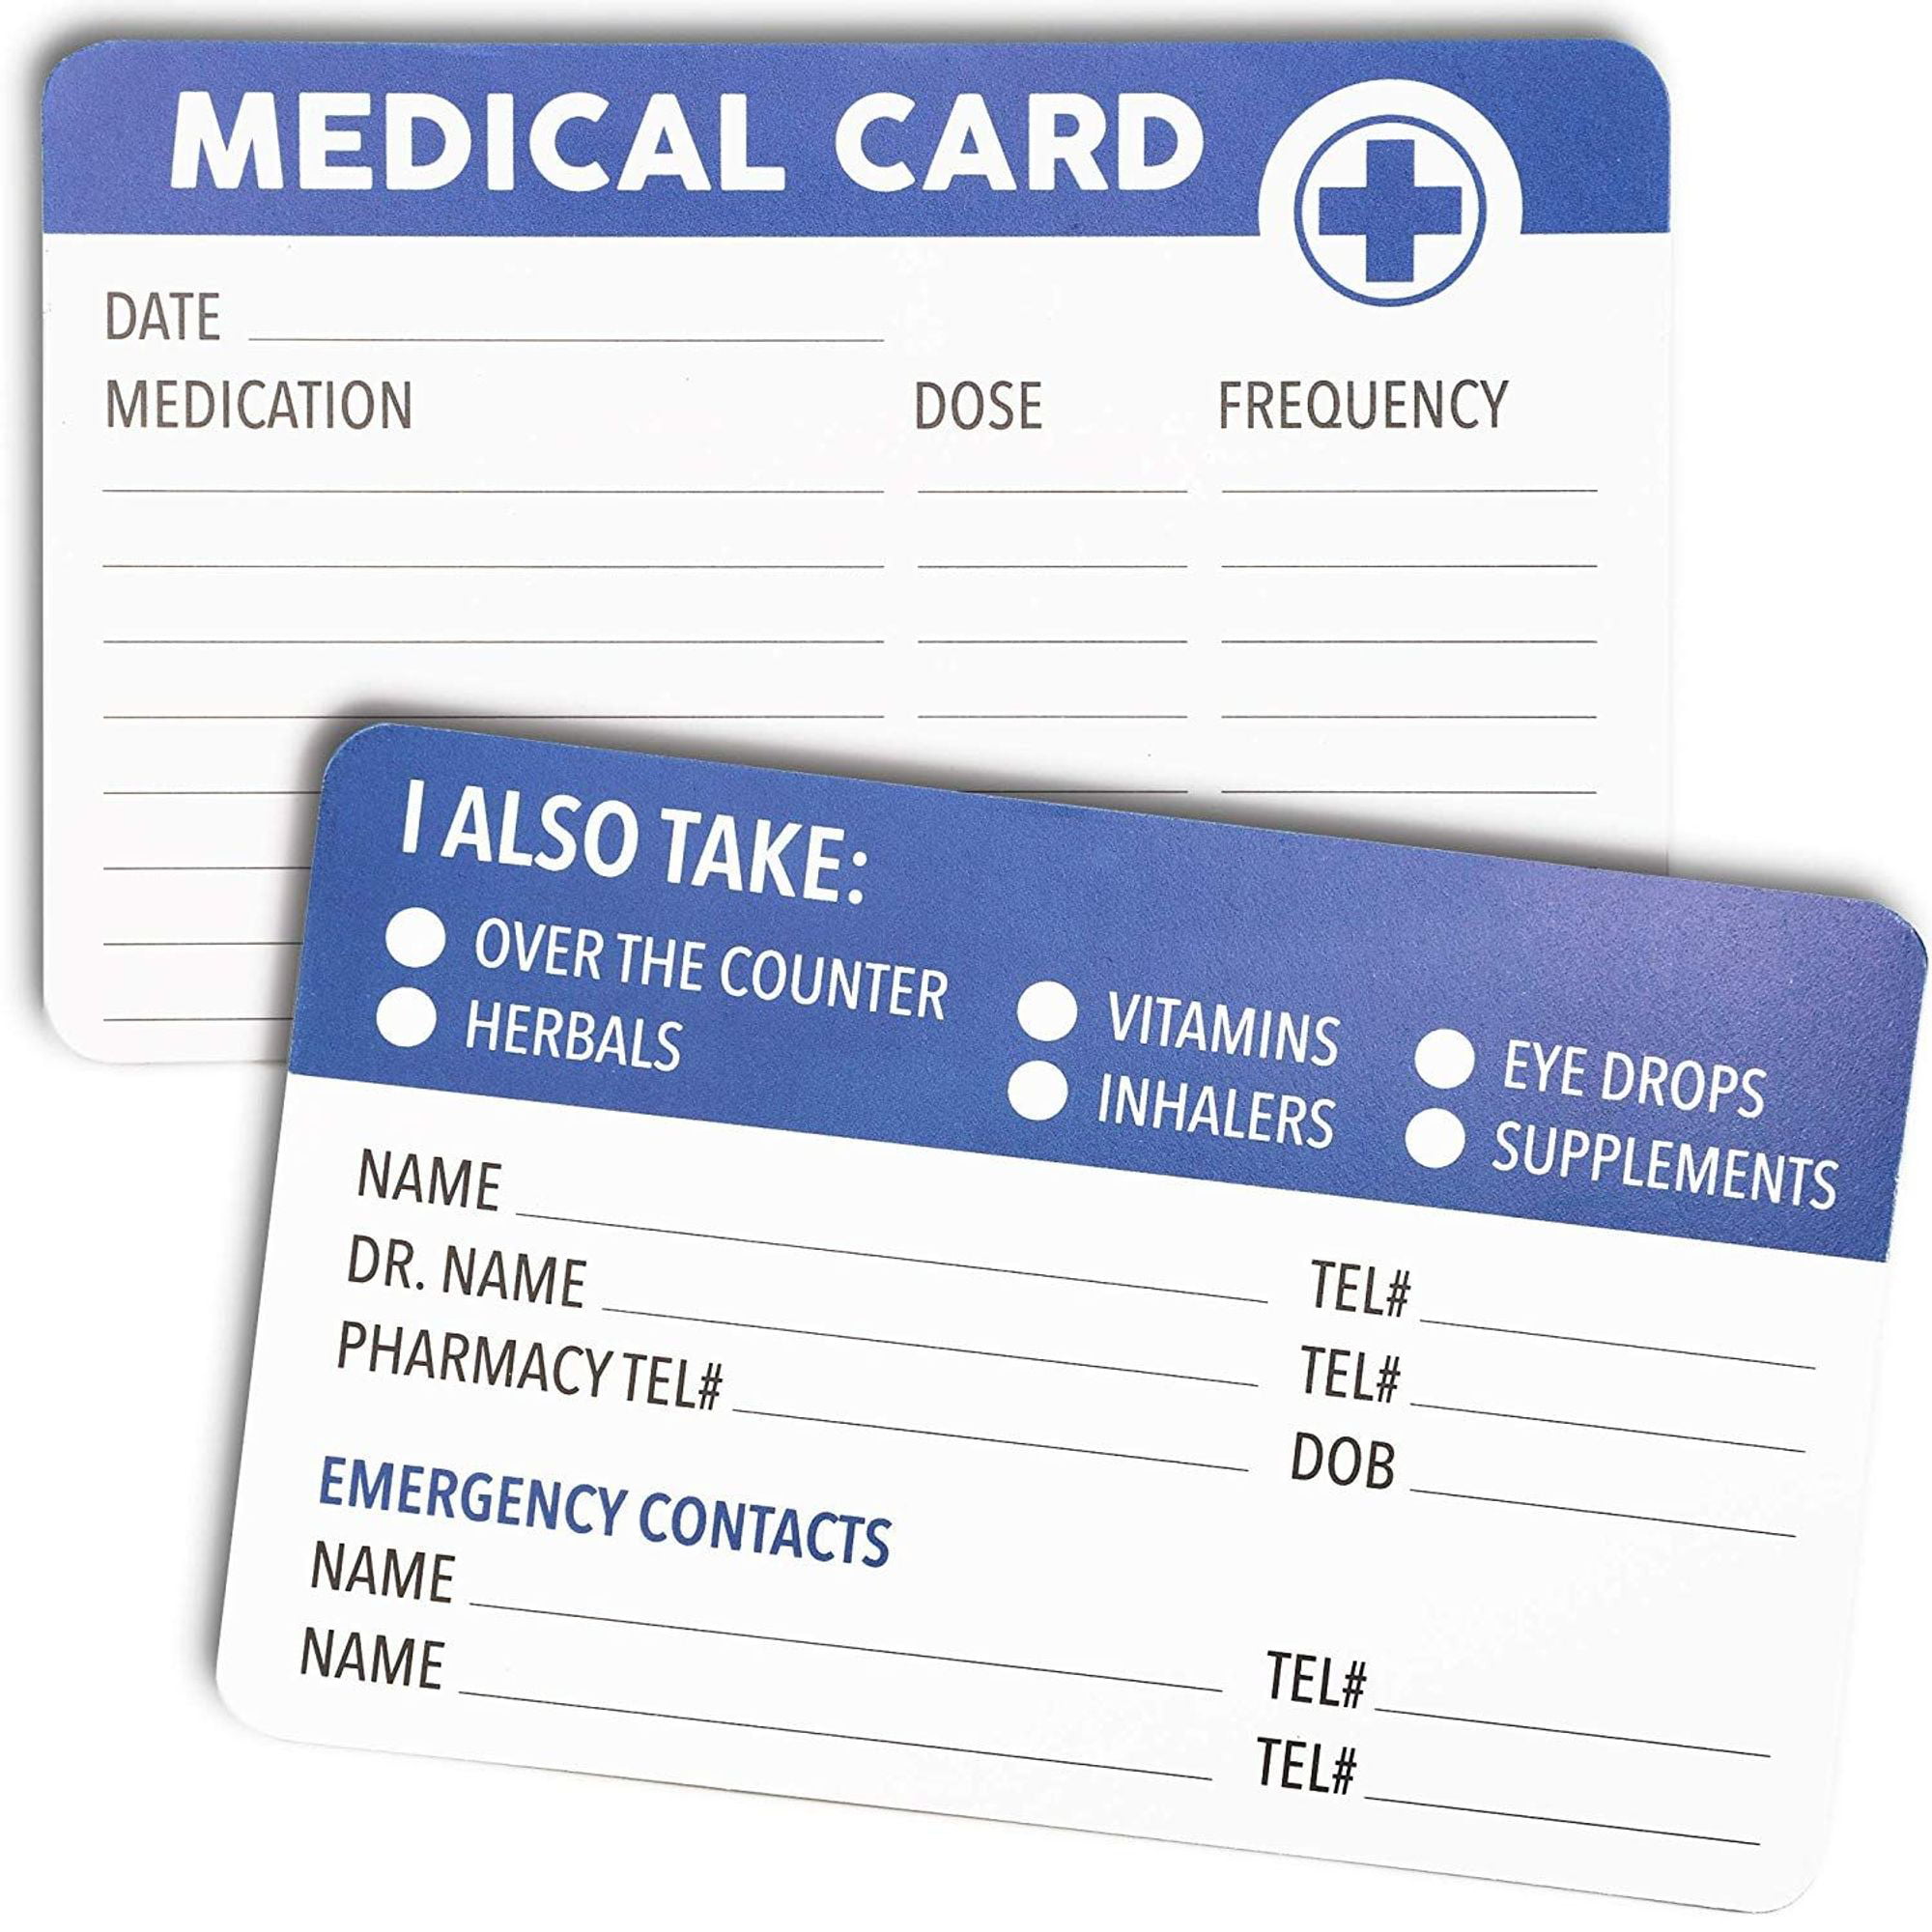 the medical card